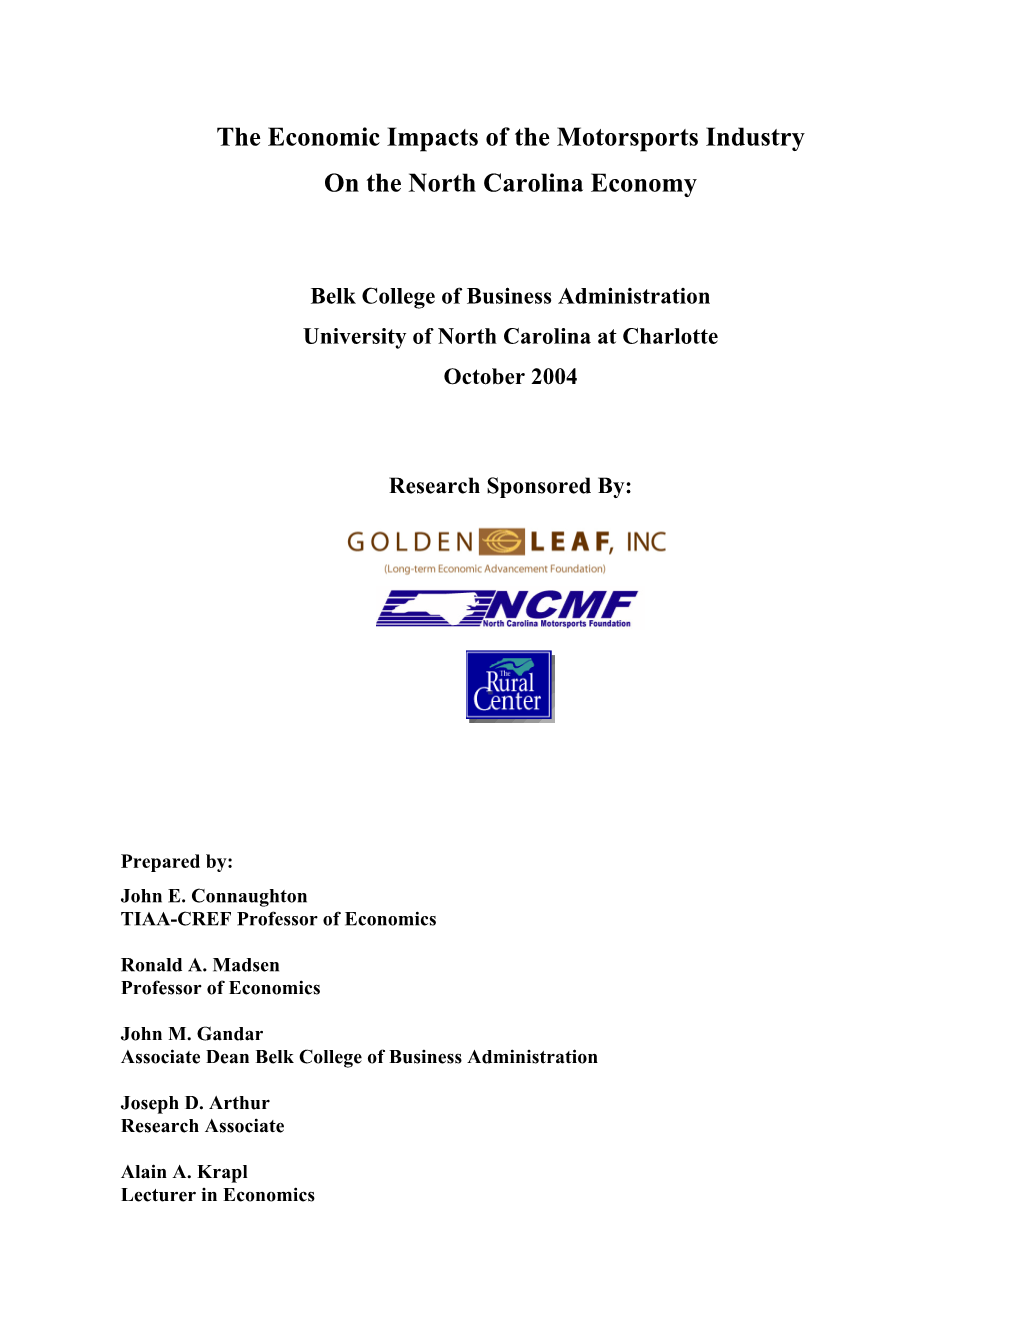 The Economic Impacts of the Motorsports Industry on the North Carolina Economy